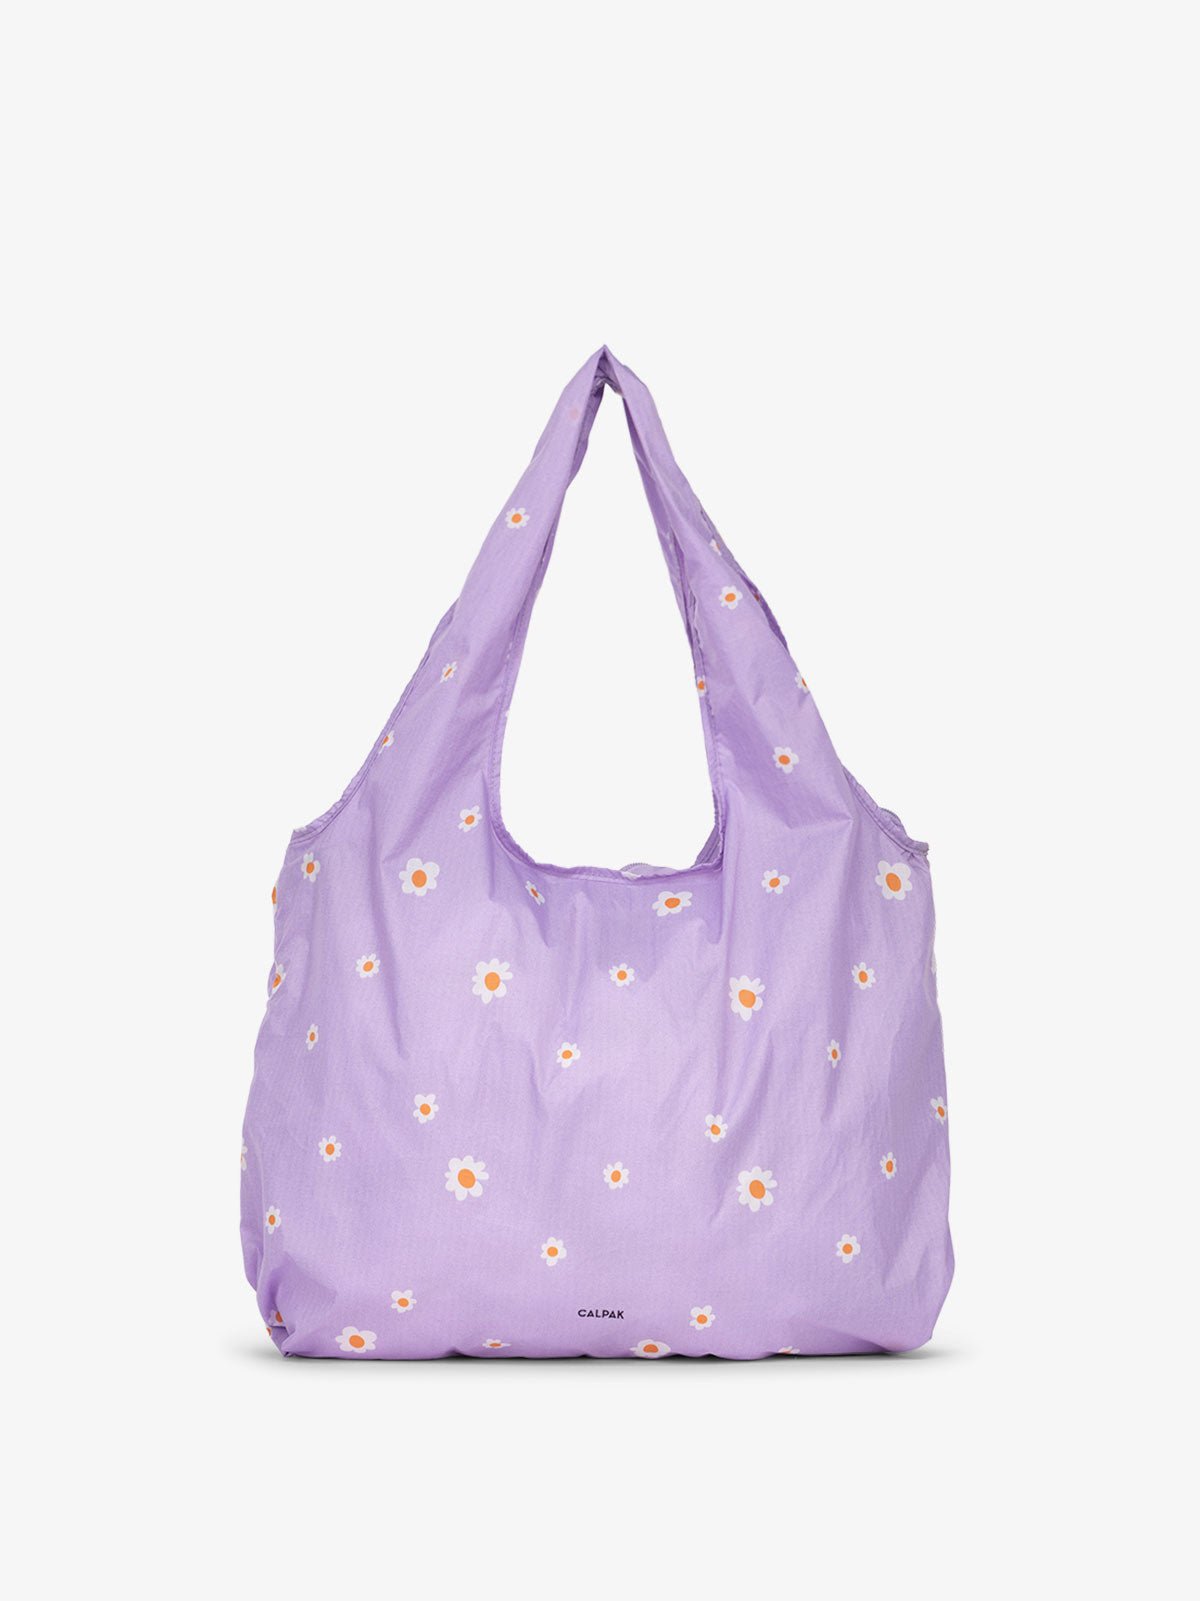 CALPAK Compakt tote bag in orchid fields